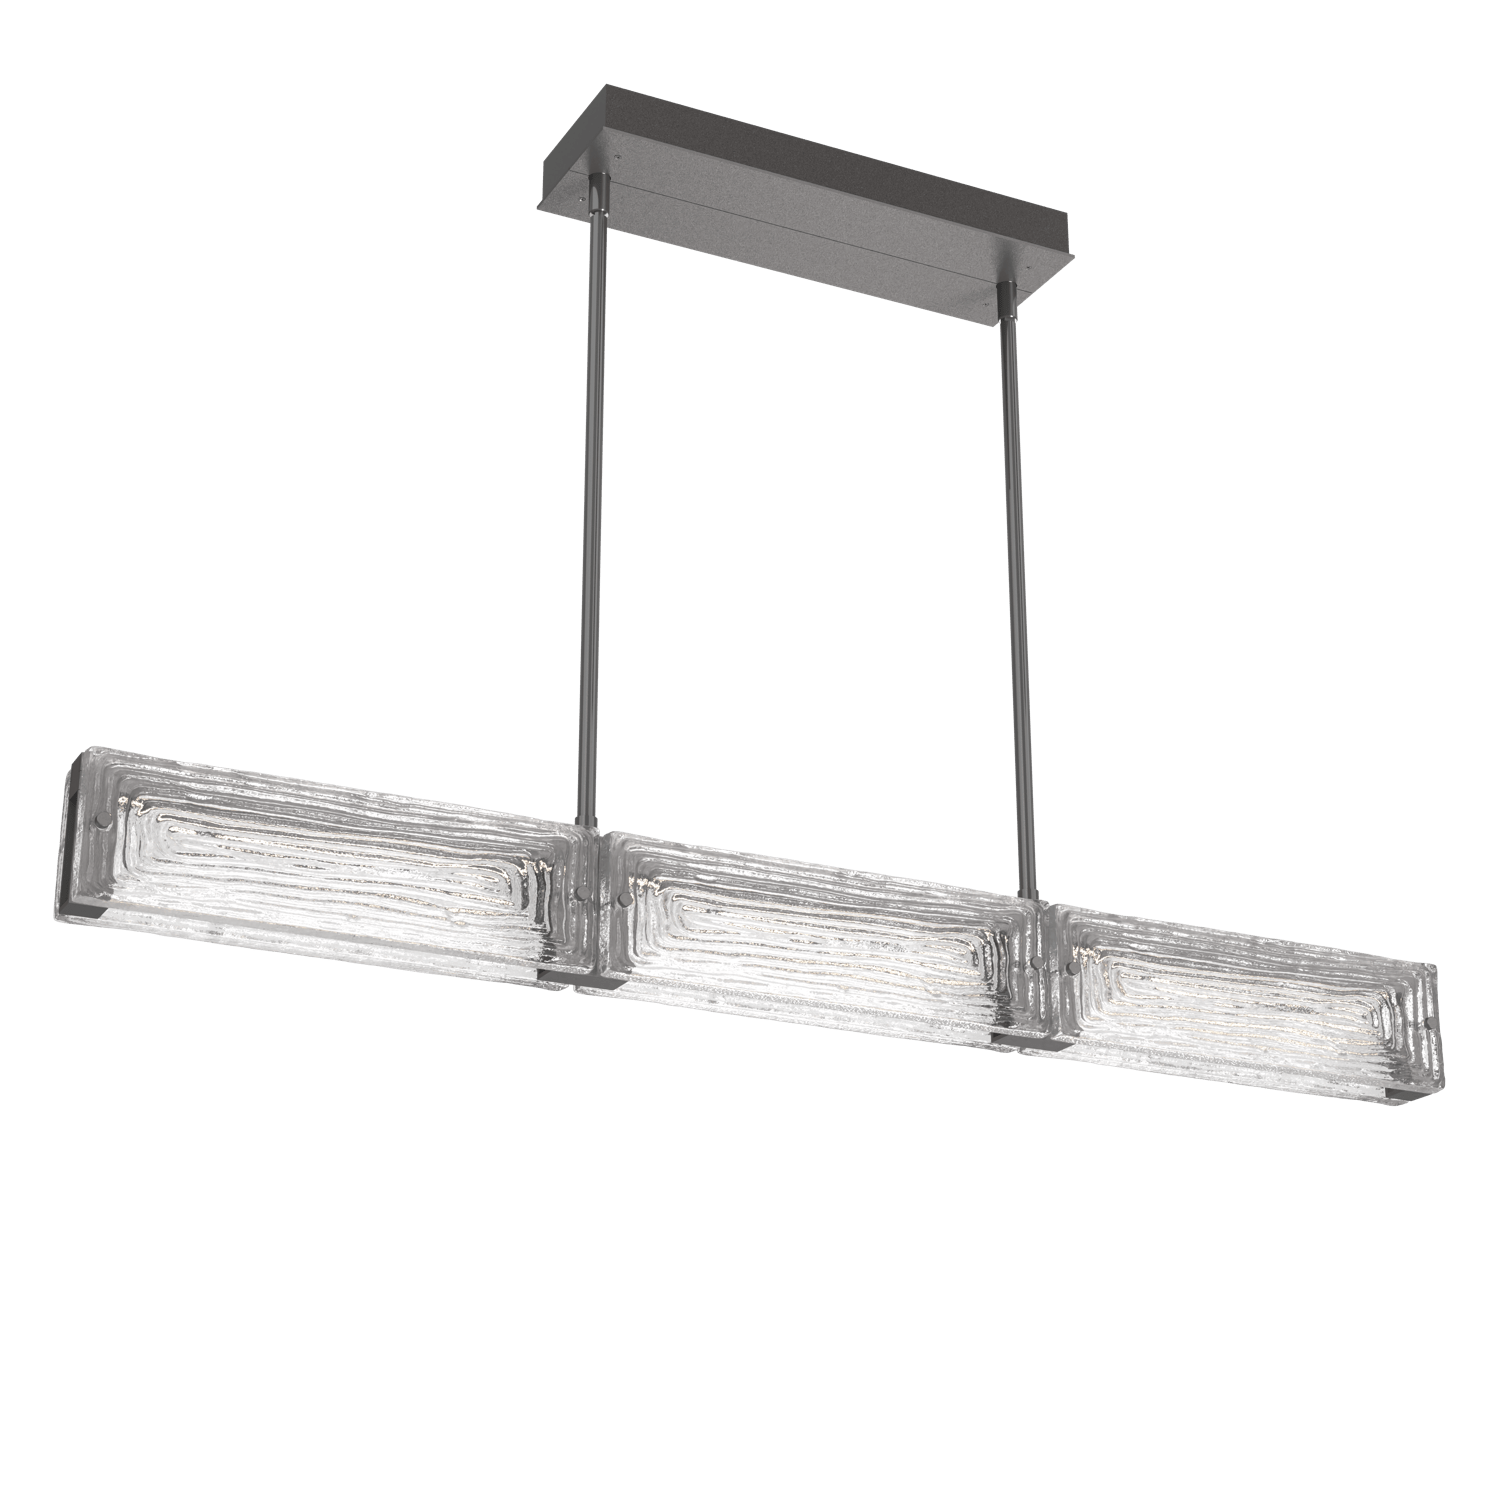 PLB0090-43-GP-TL-Hammerton-Studio-Tabulo-43-inch-linear-chandelier-with-graphite-finish-and-clear-linea-cast-glass-shade-and-LED-lamping